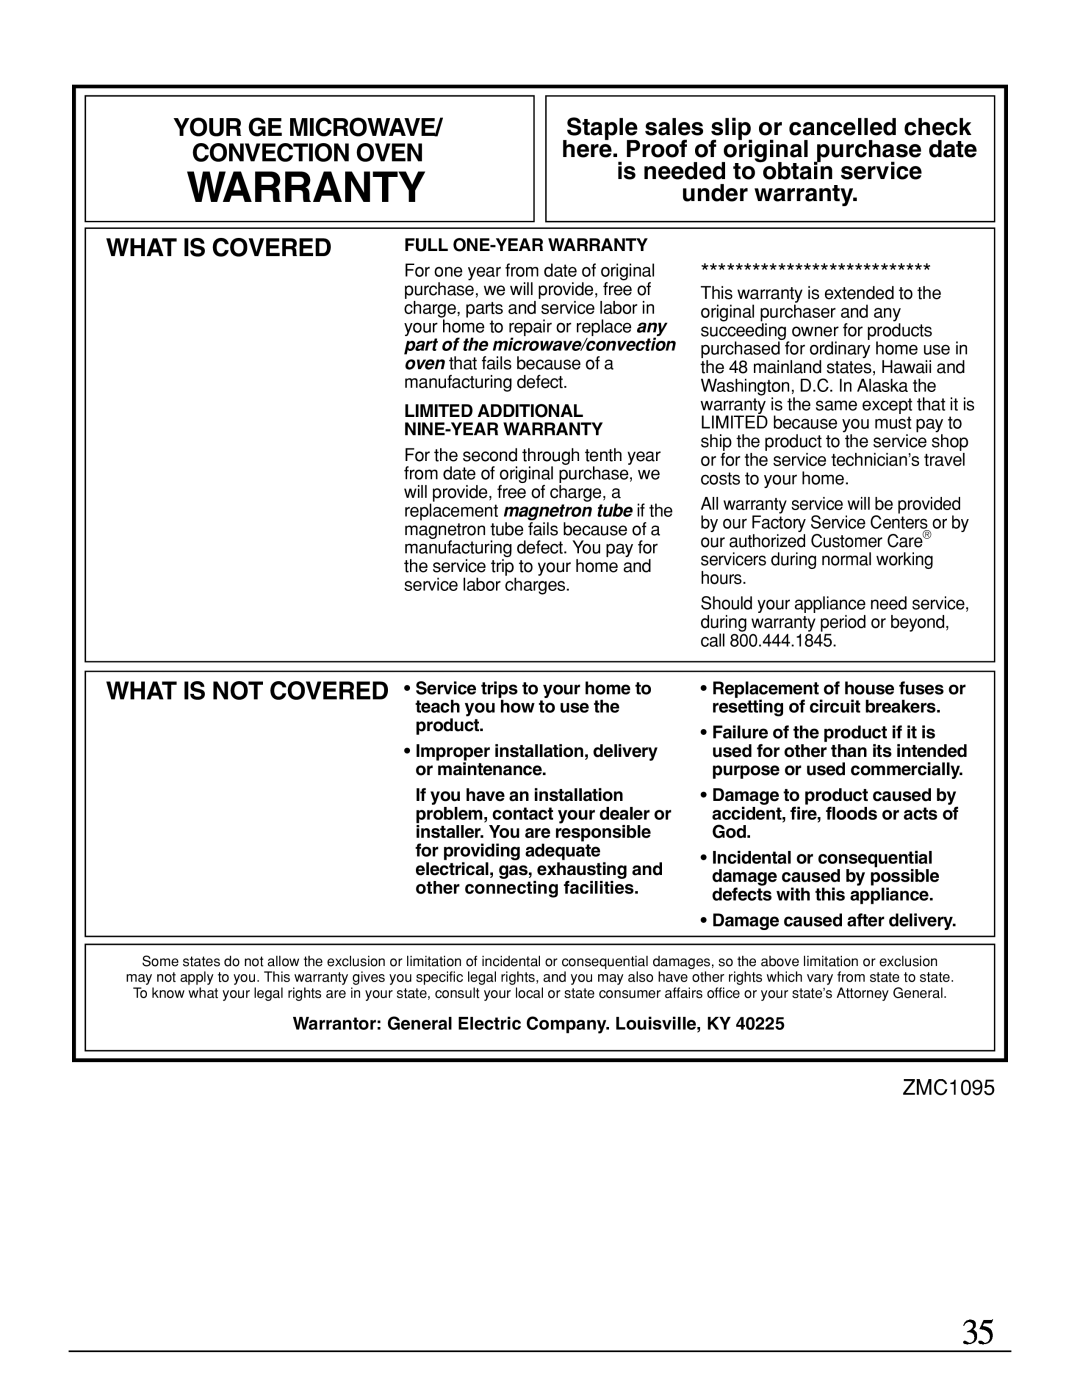 GE Monogram ZMC1095 owner manual Warranty, Your Ge Microwave Convection Oven, What Is Covered, under warranty 